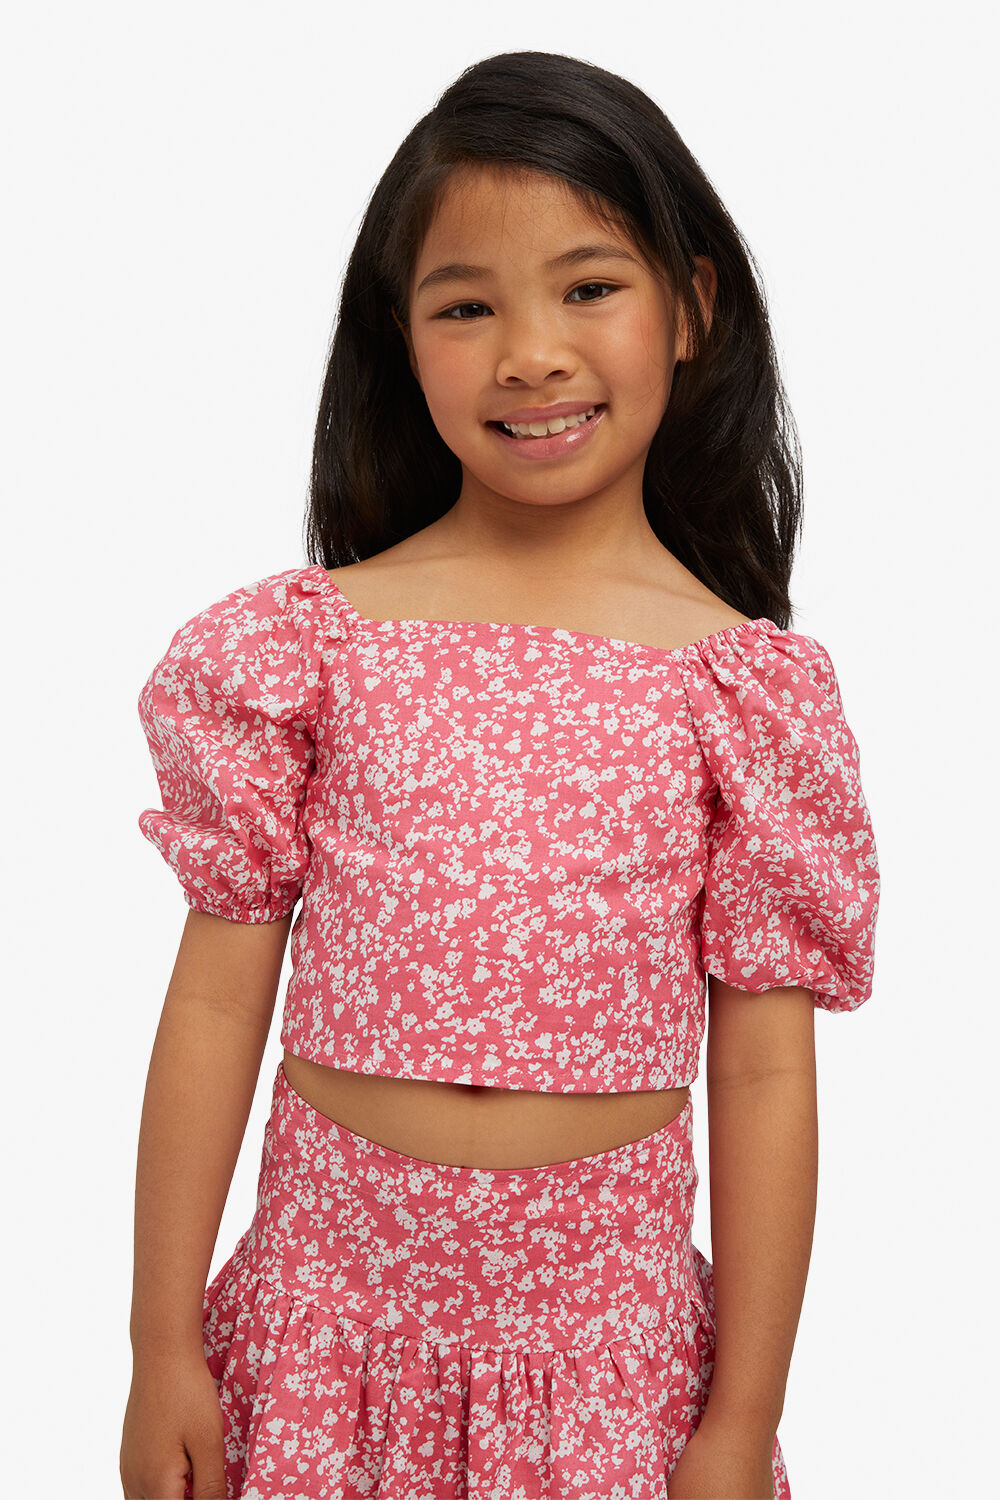 GIRLS AMELIA FLORAL TOP in colour PEACH WHIP